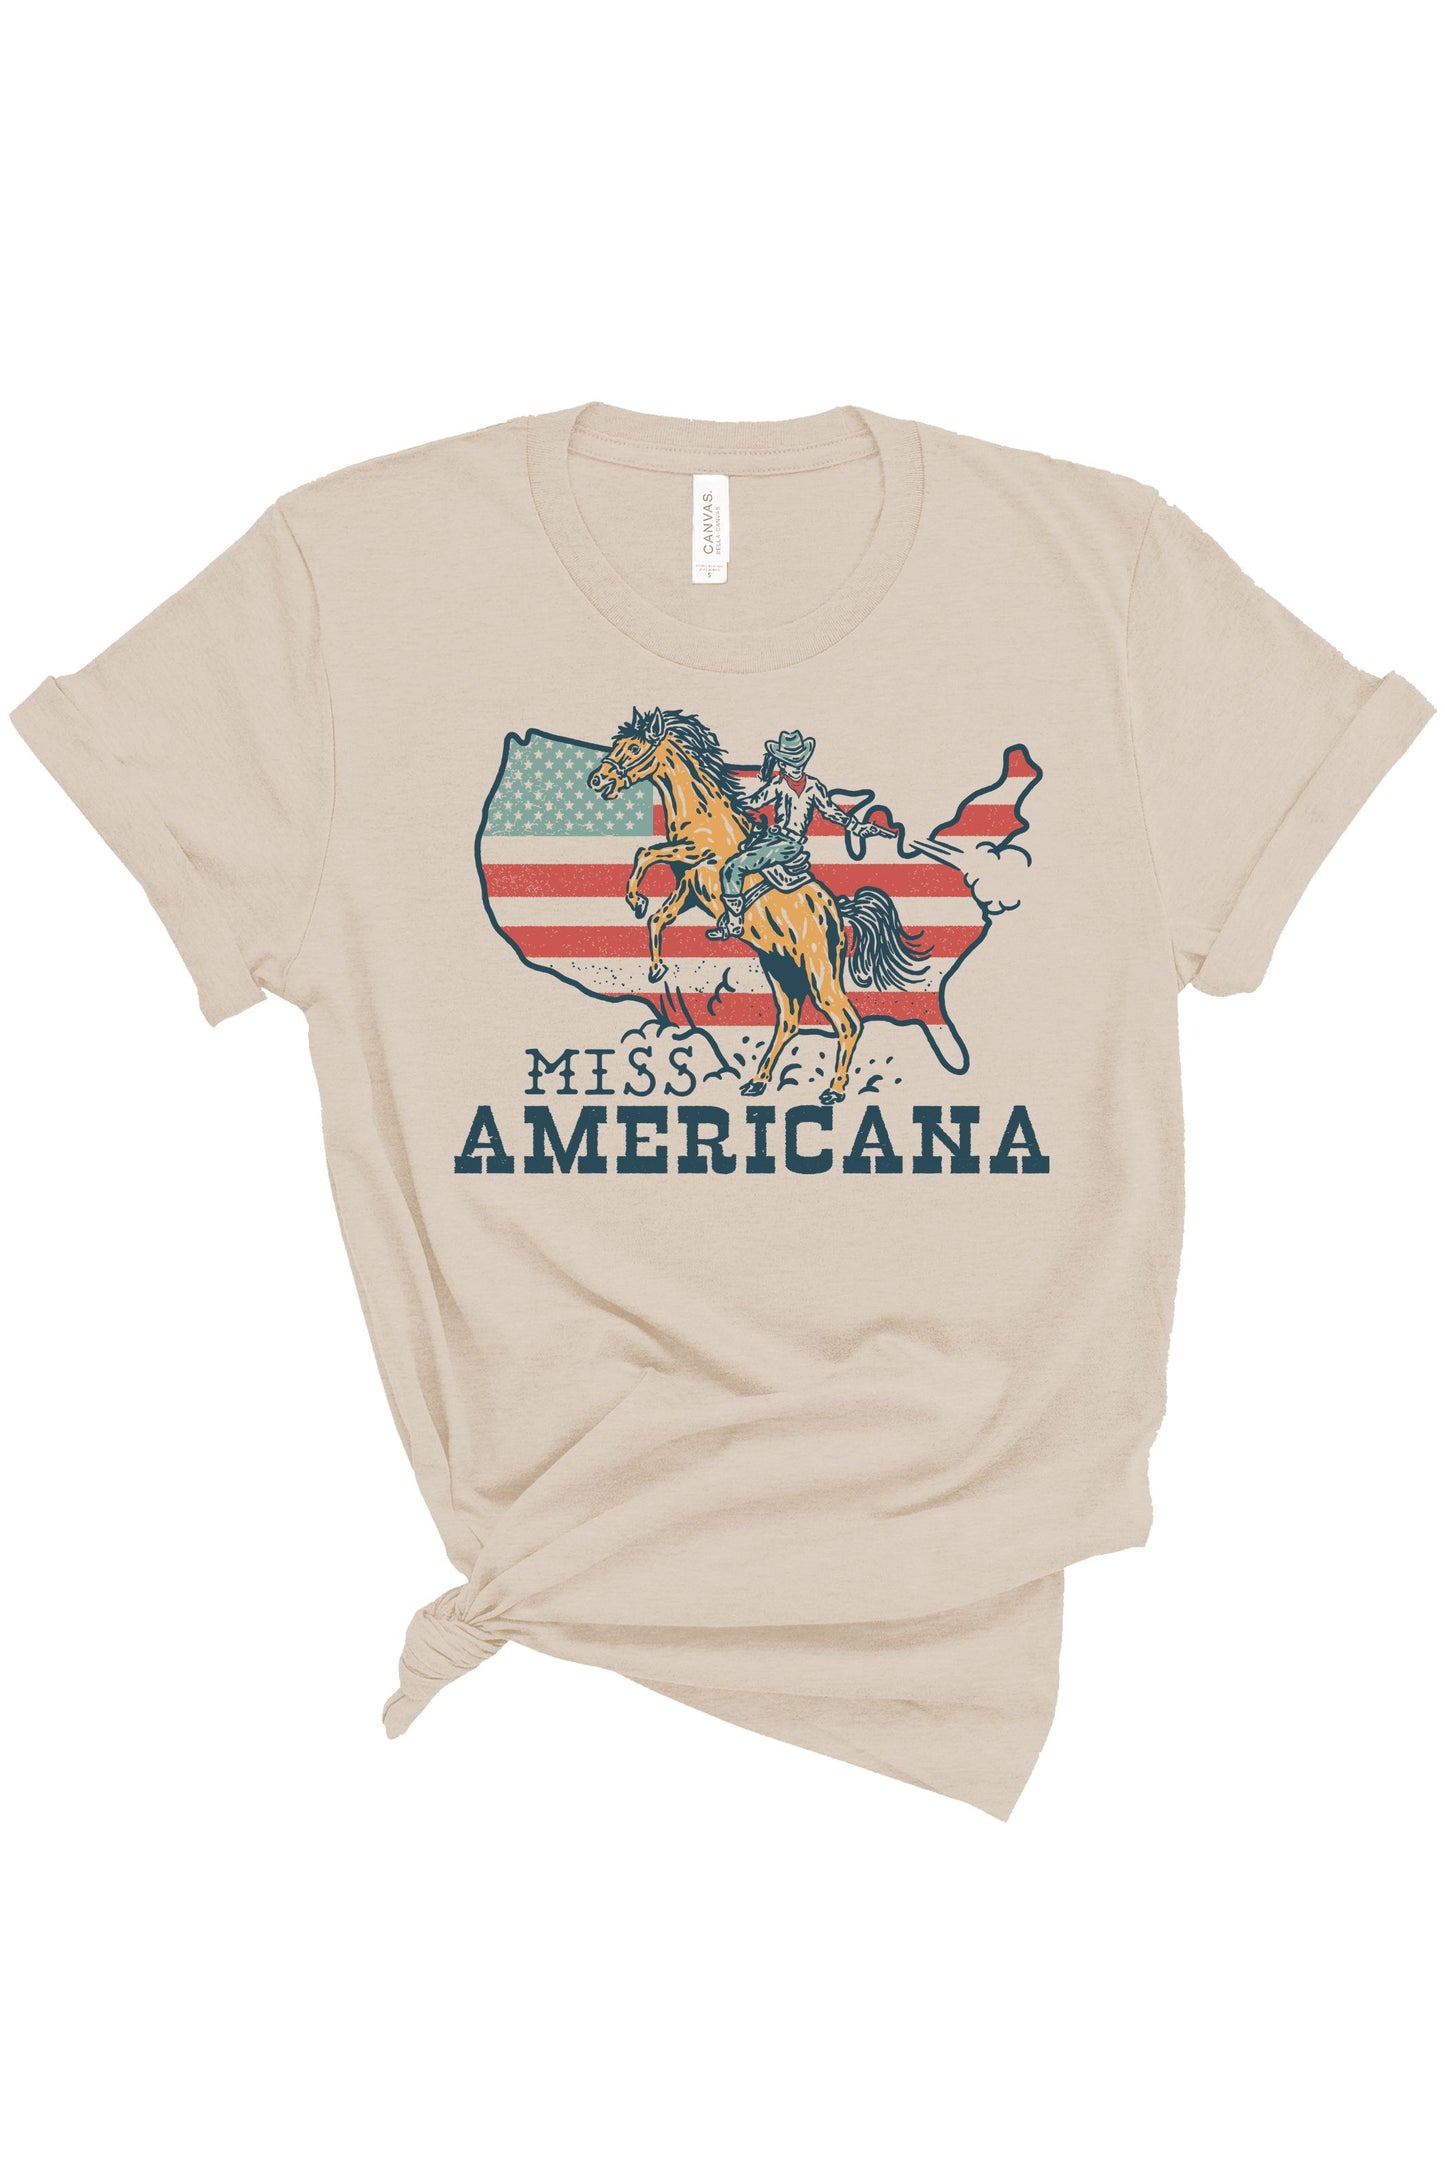 Miss Americana | Adult Tee-Sister Shirts-Sister Shirts, Cute & Custom Tees for Mama & Littles in Trussville, Alabama.